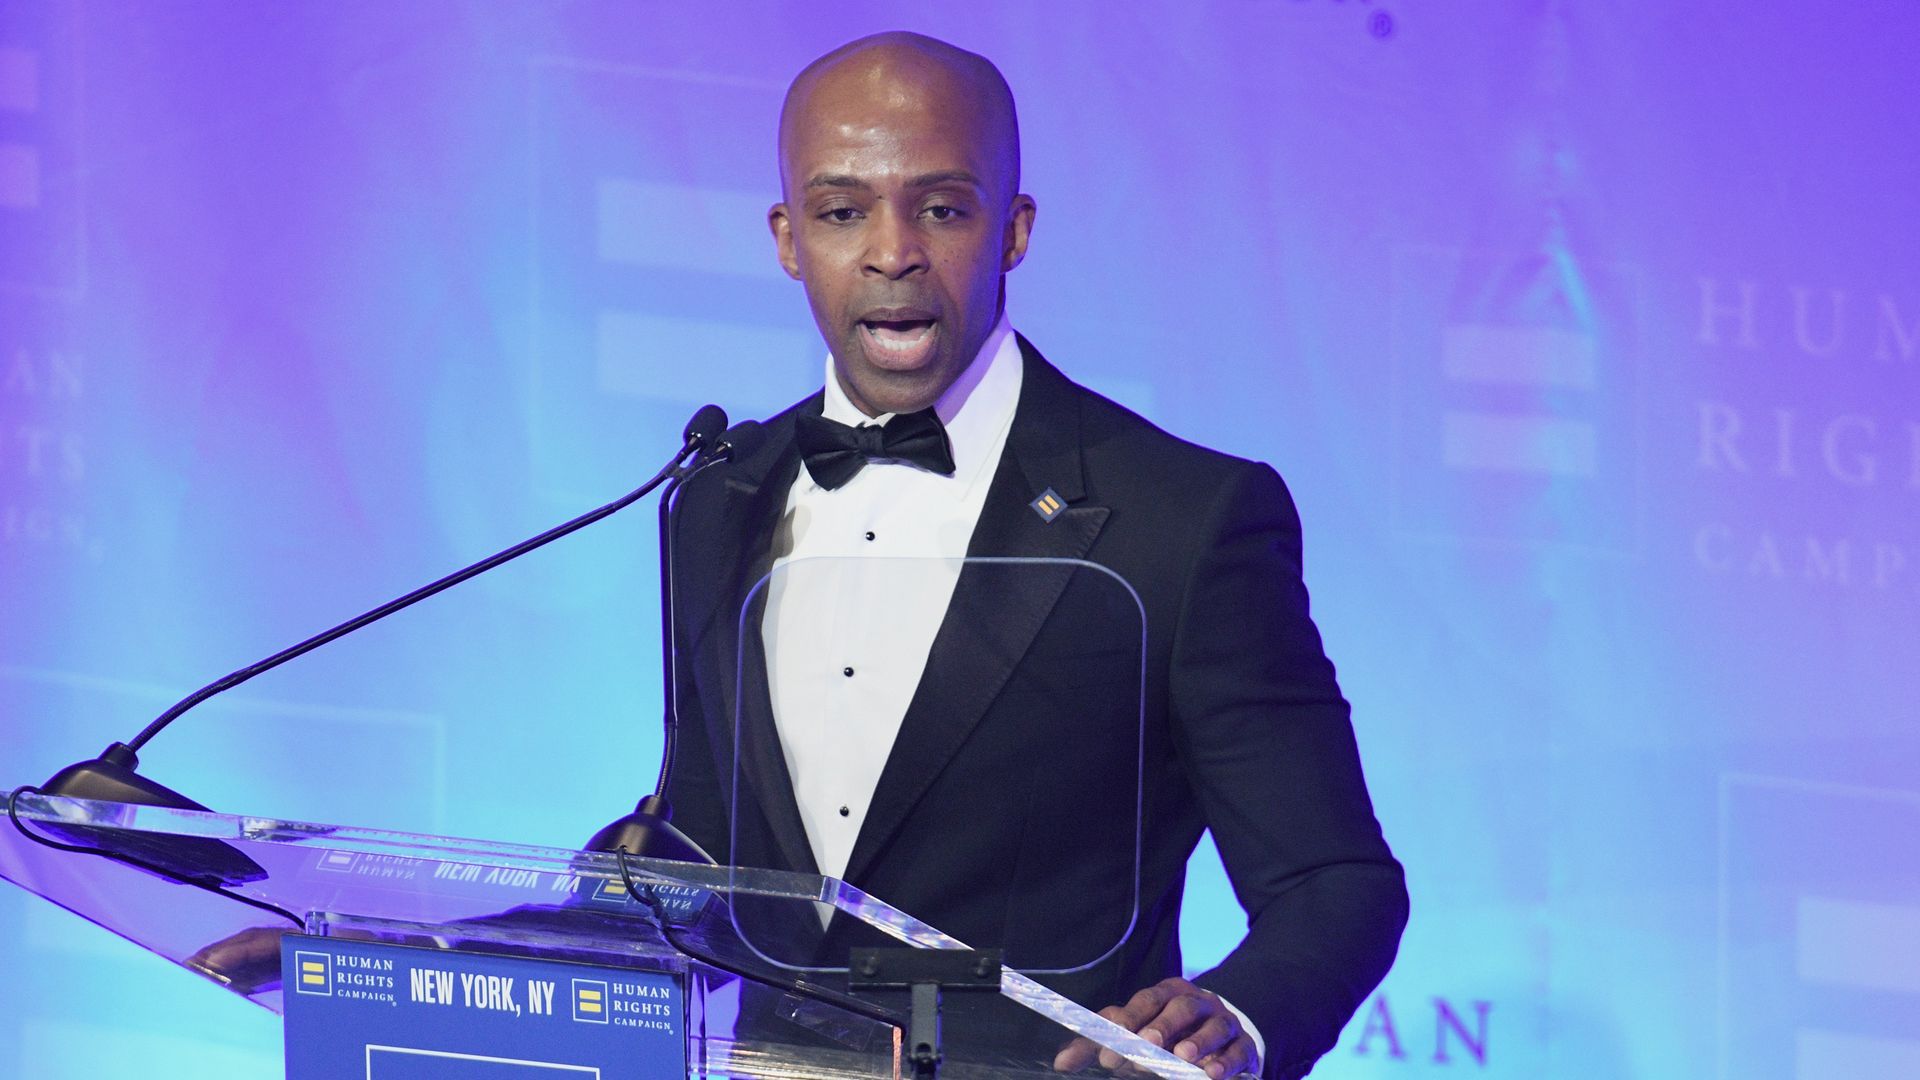 President Alphonso David speaks during the Human Rights Campaign's 19th Annual Greater New York Gala at the Marriott Marquis Hotel on February 01, 2020 in New York City. 